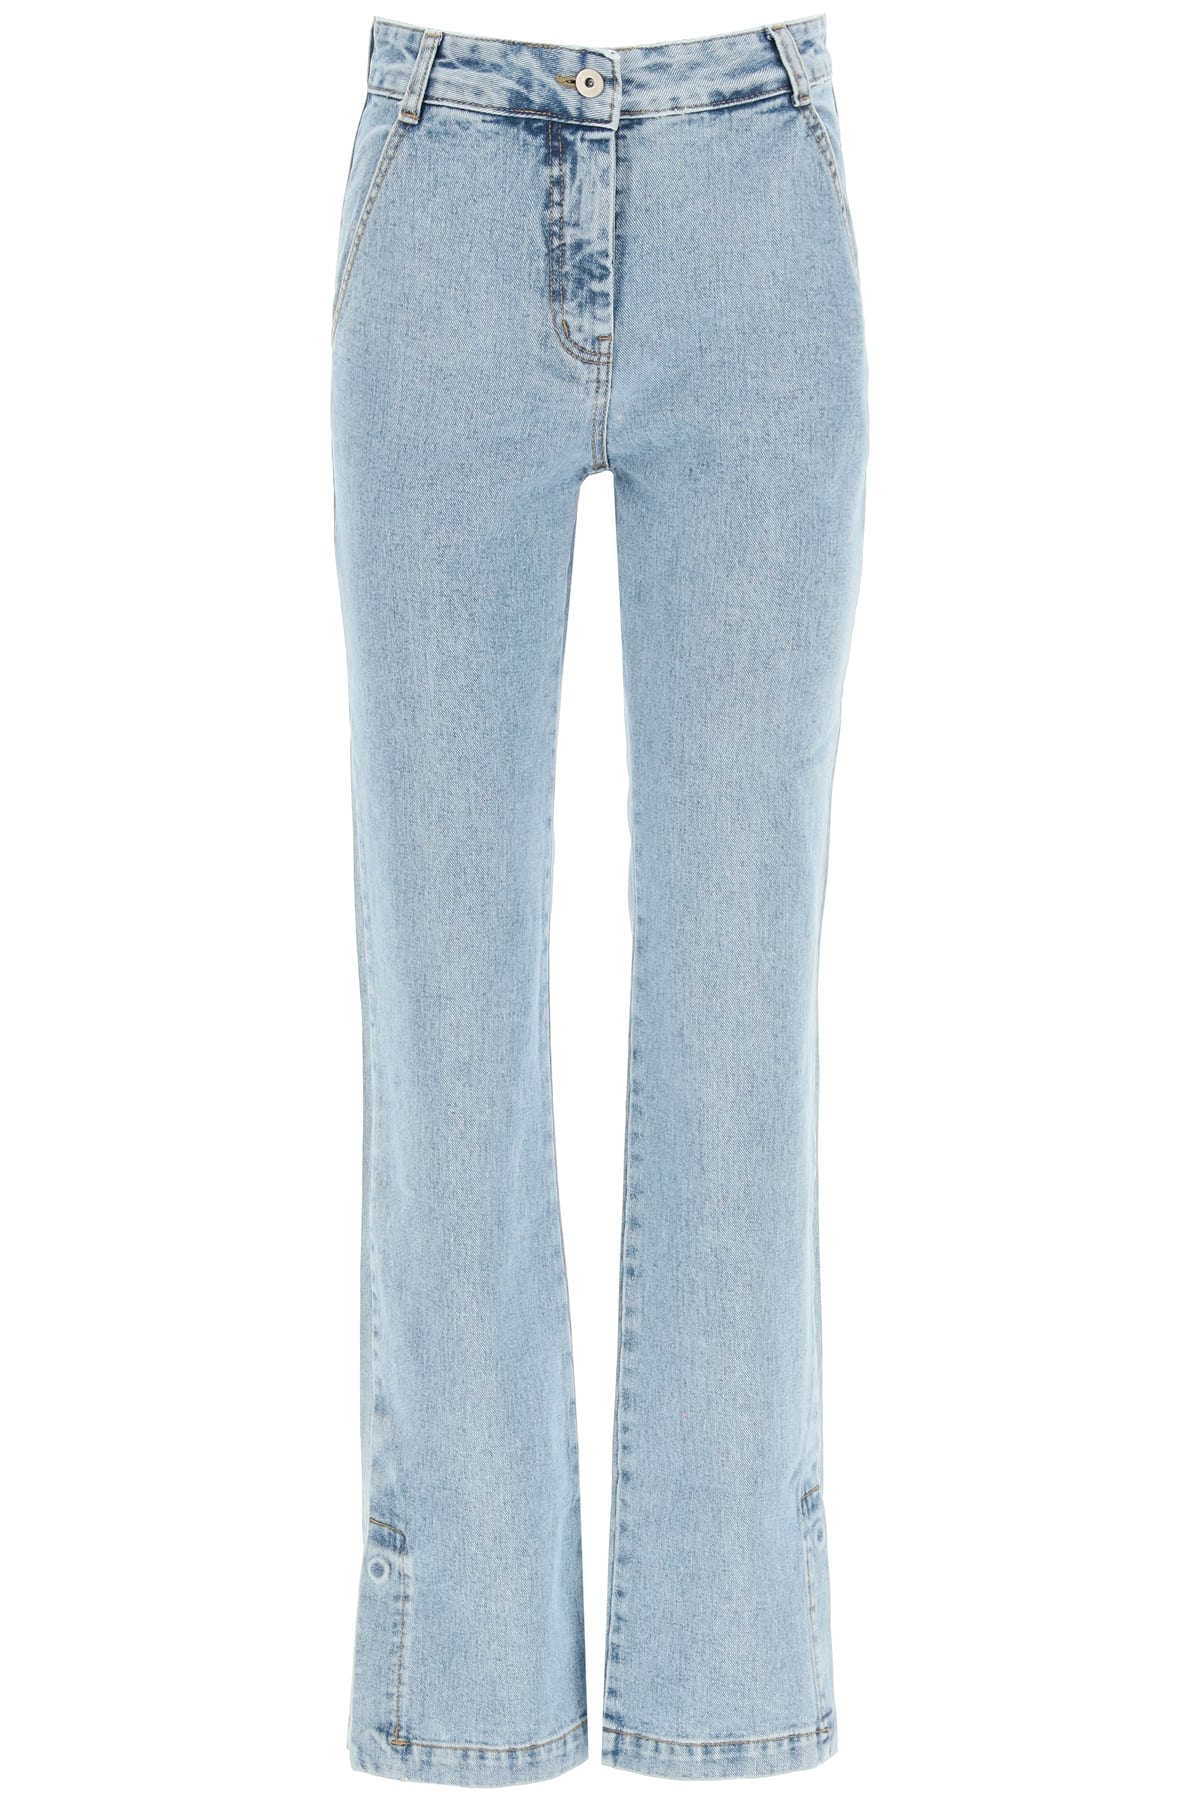 Low Classic Jeans Light Wash With High Waist